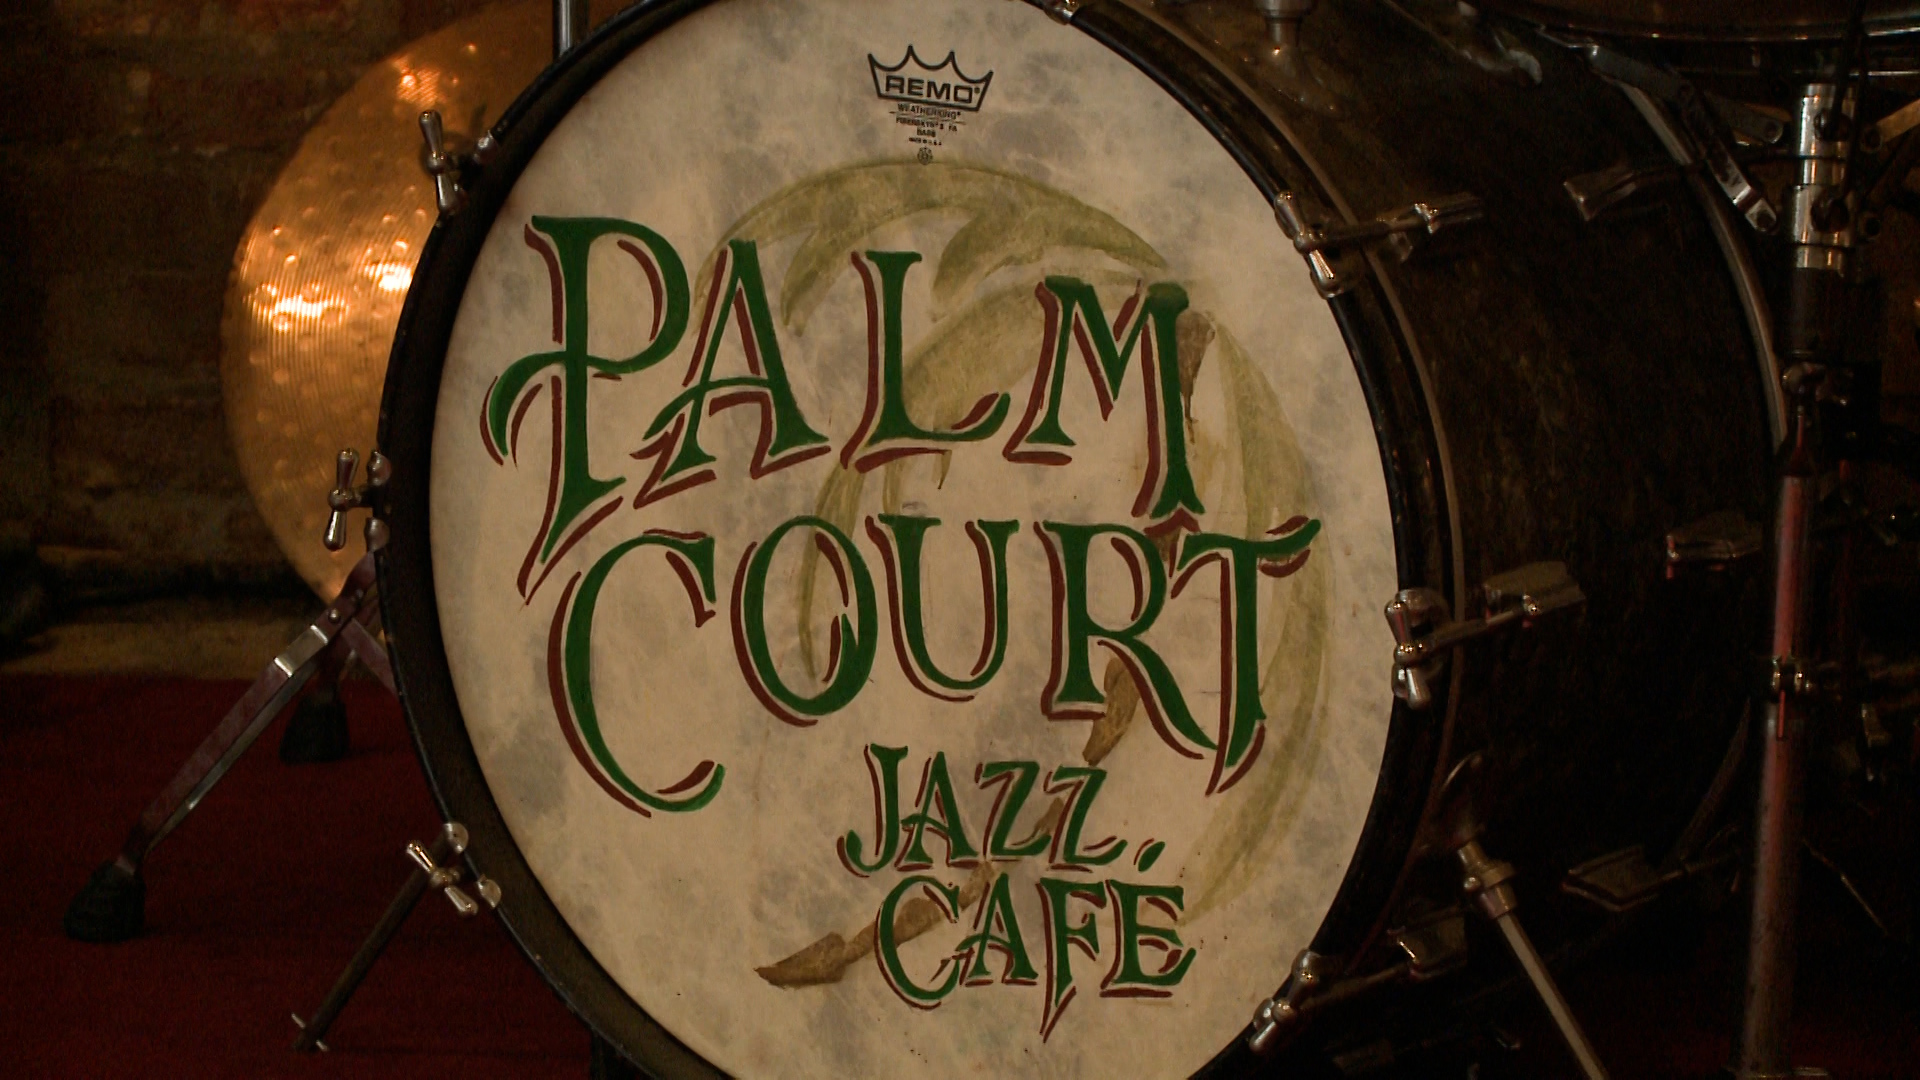 After more than 35 years, owner Nina Buck will close the doors on the Palm Court Jazz Café on June 2.